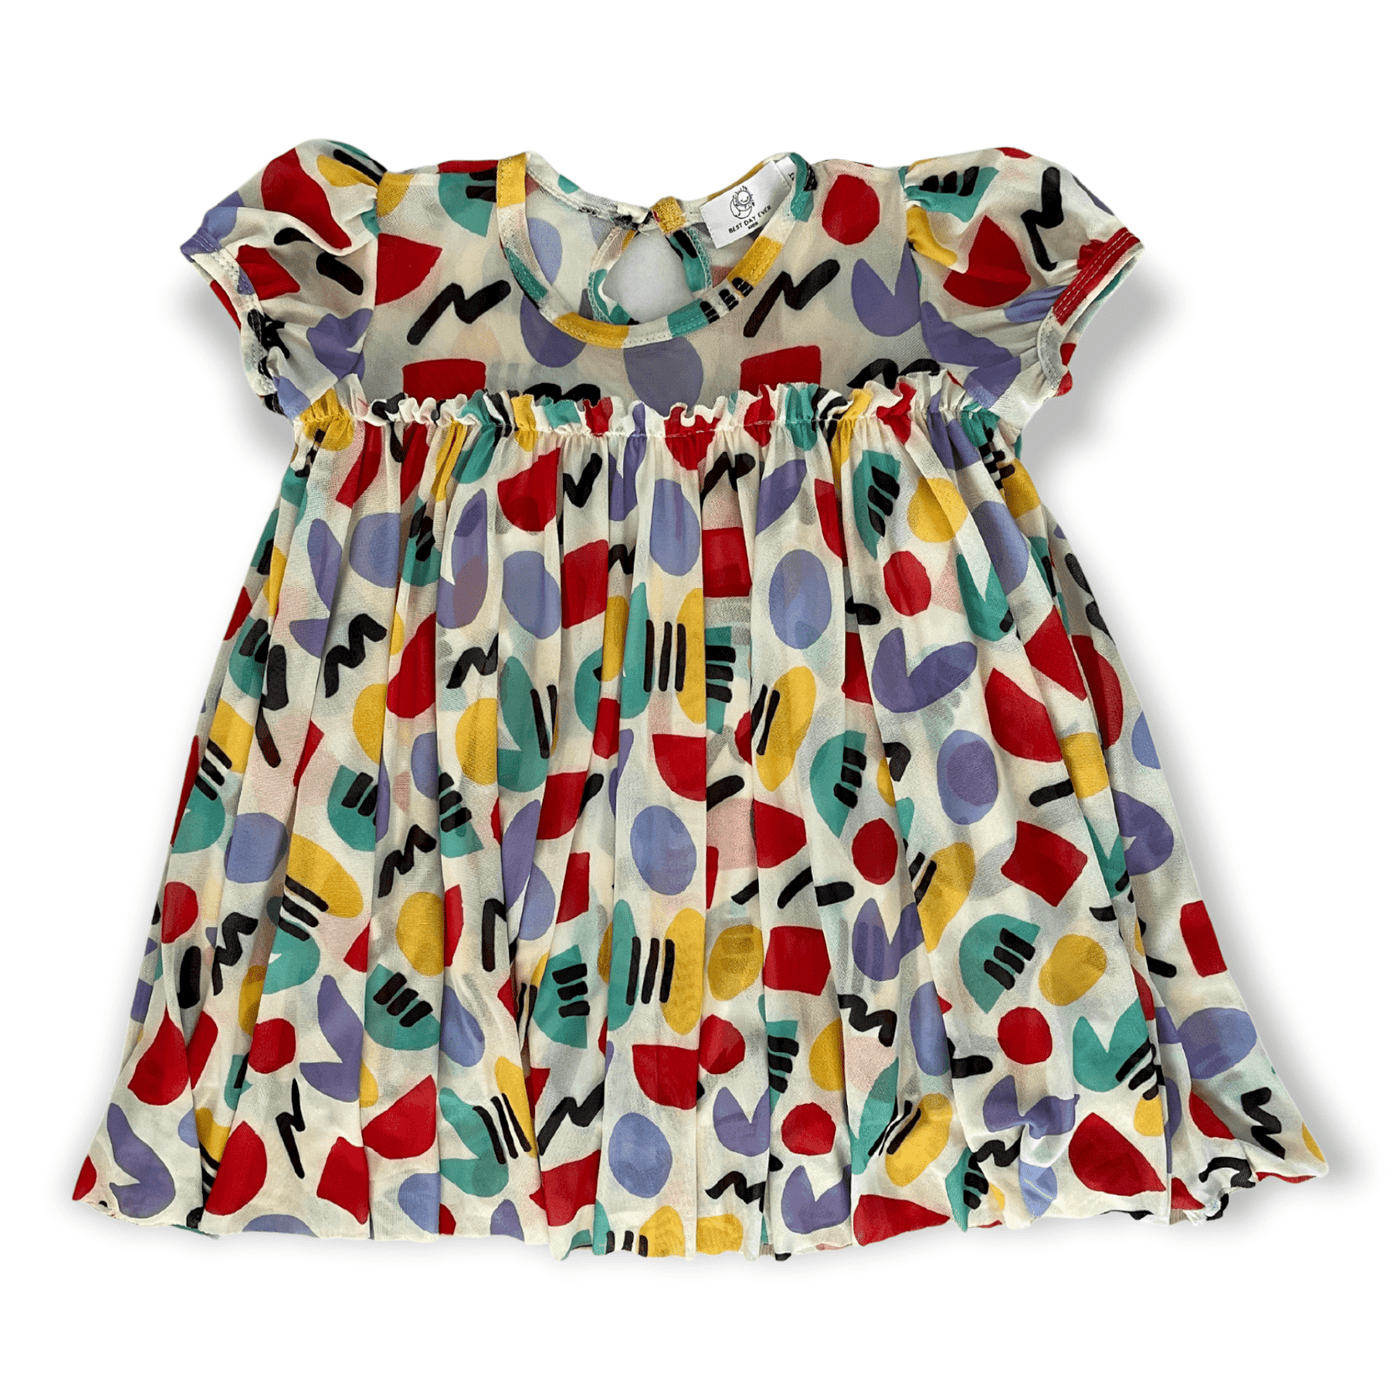 Best Day Ever Kids Baby & Toddler Dresses Juniper Dress - Abstract buy online boutique kids clothing